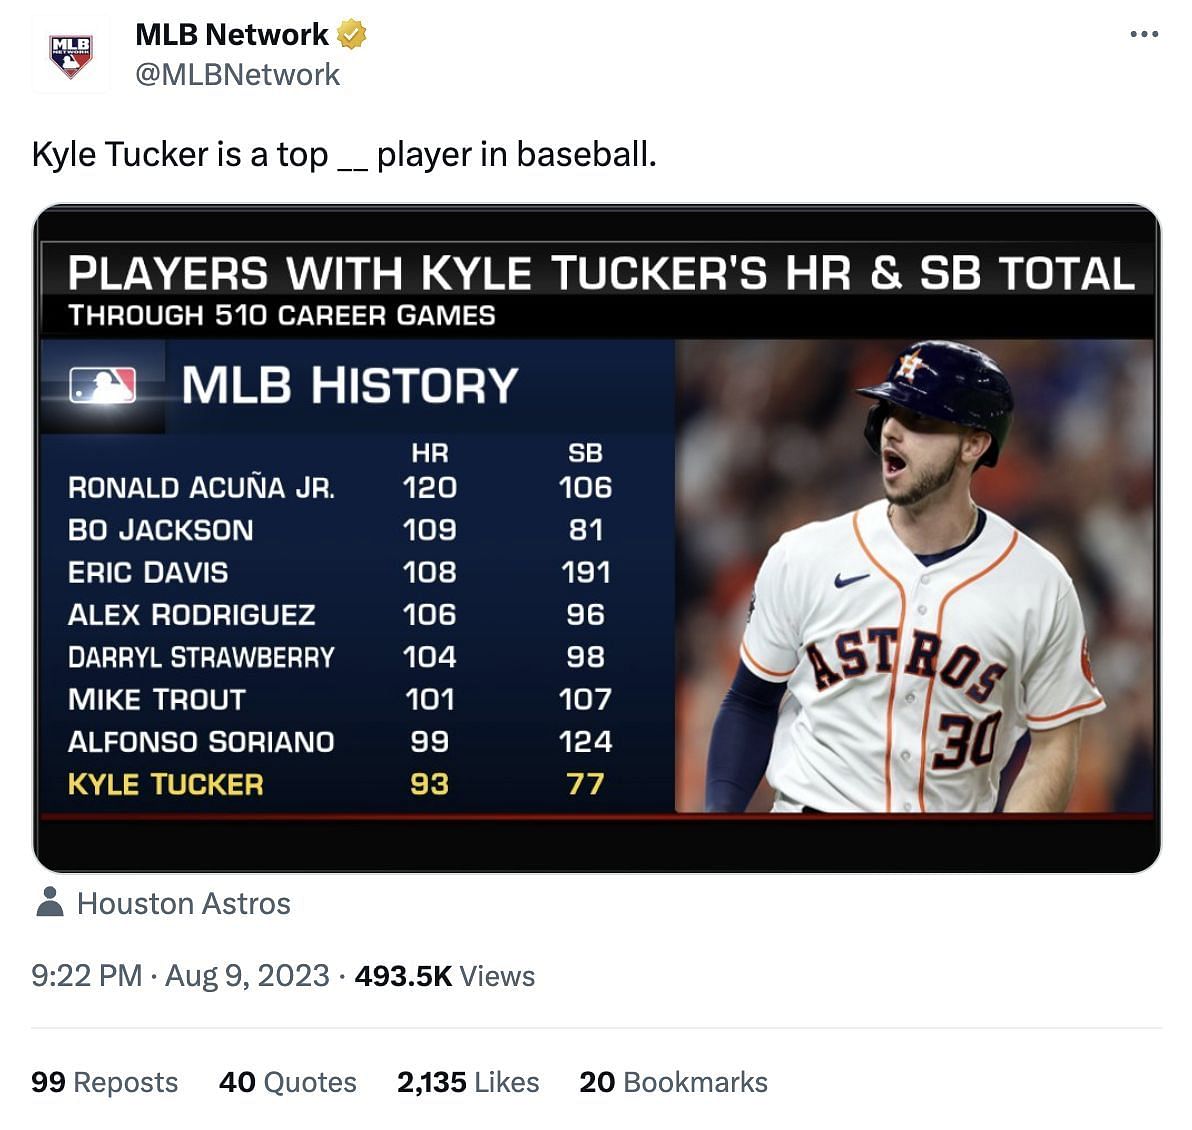 &quot;Kyle Tucker is a top __ player in baseball.&quot; - MLB Network